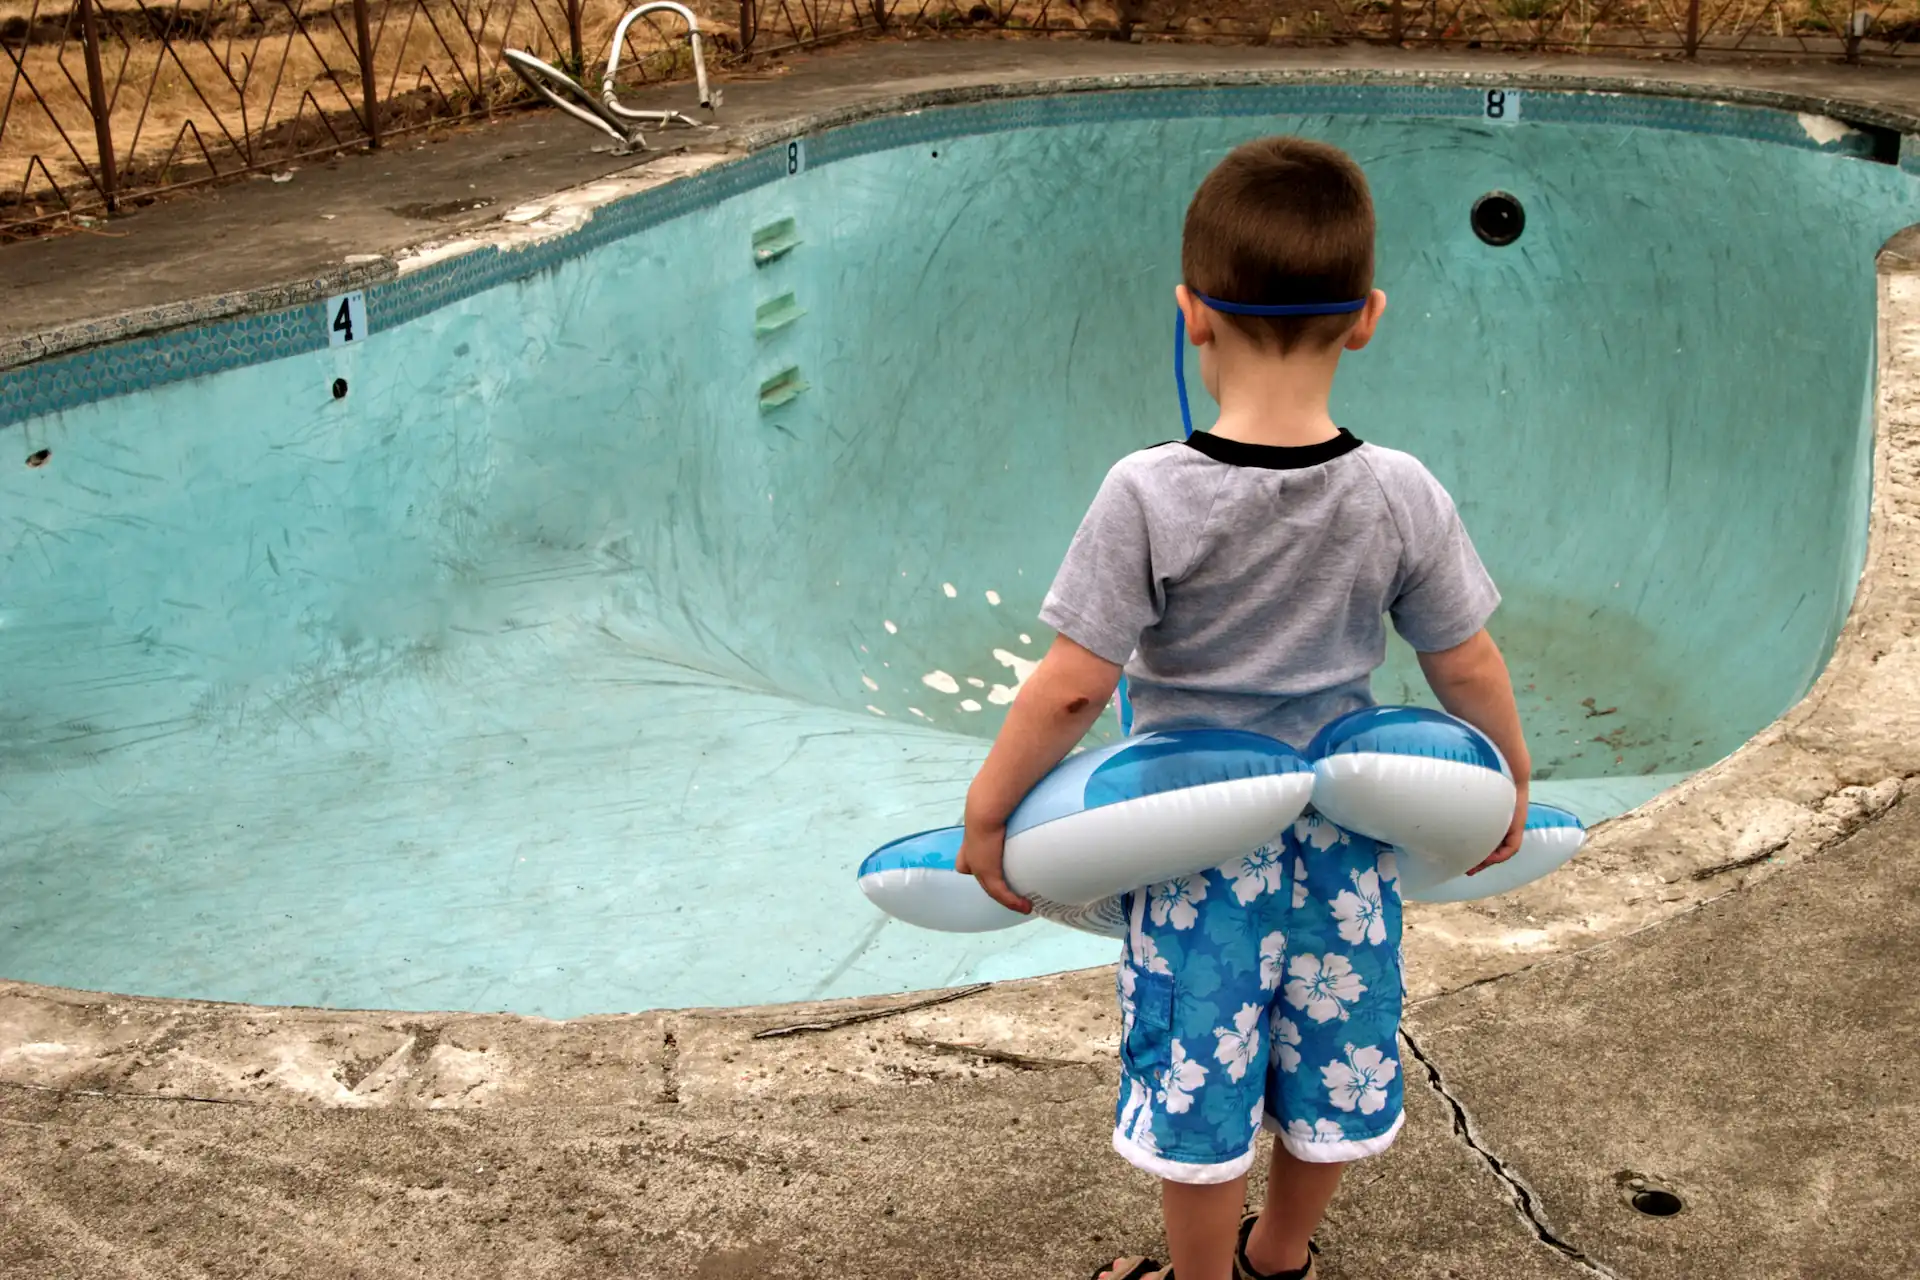 Medium shot of a young swimmer standing at the edge of an empty, dirty in-ground pool while holding a floatie. When pool builders aren't generating pool leads, the business can feel as bleak and dry as this scene.